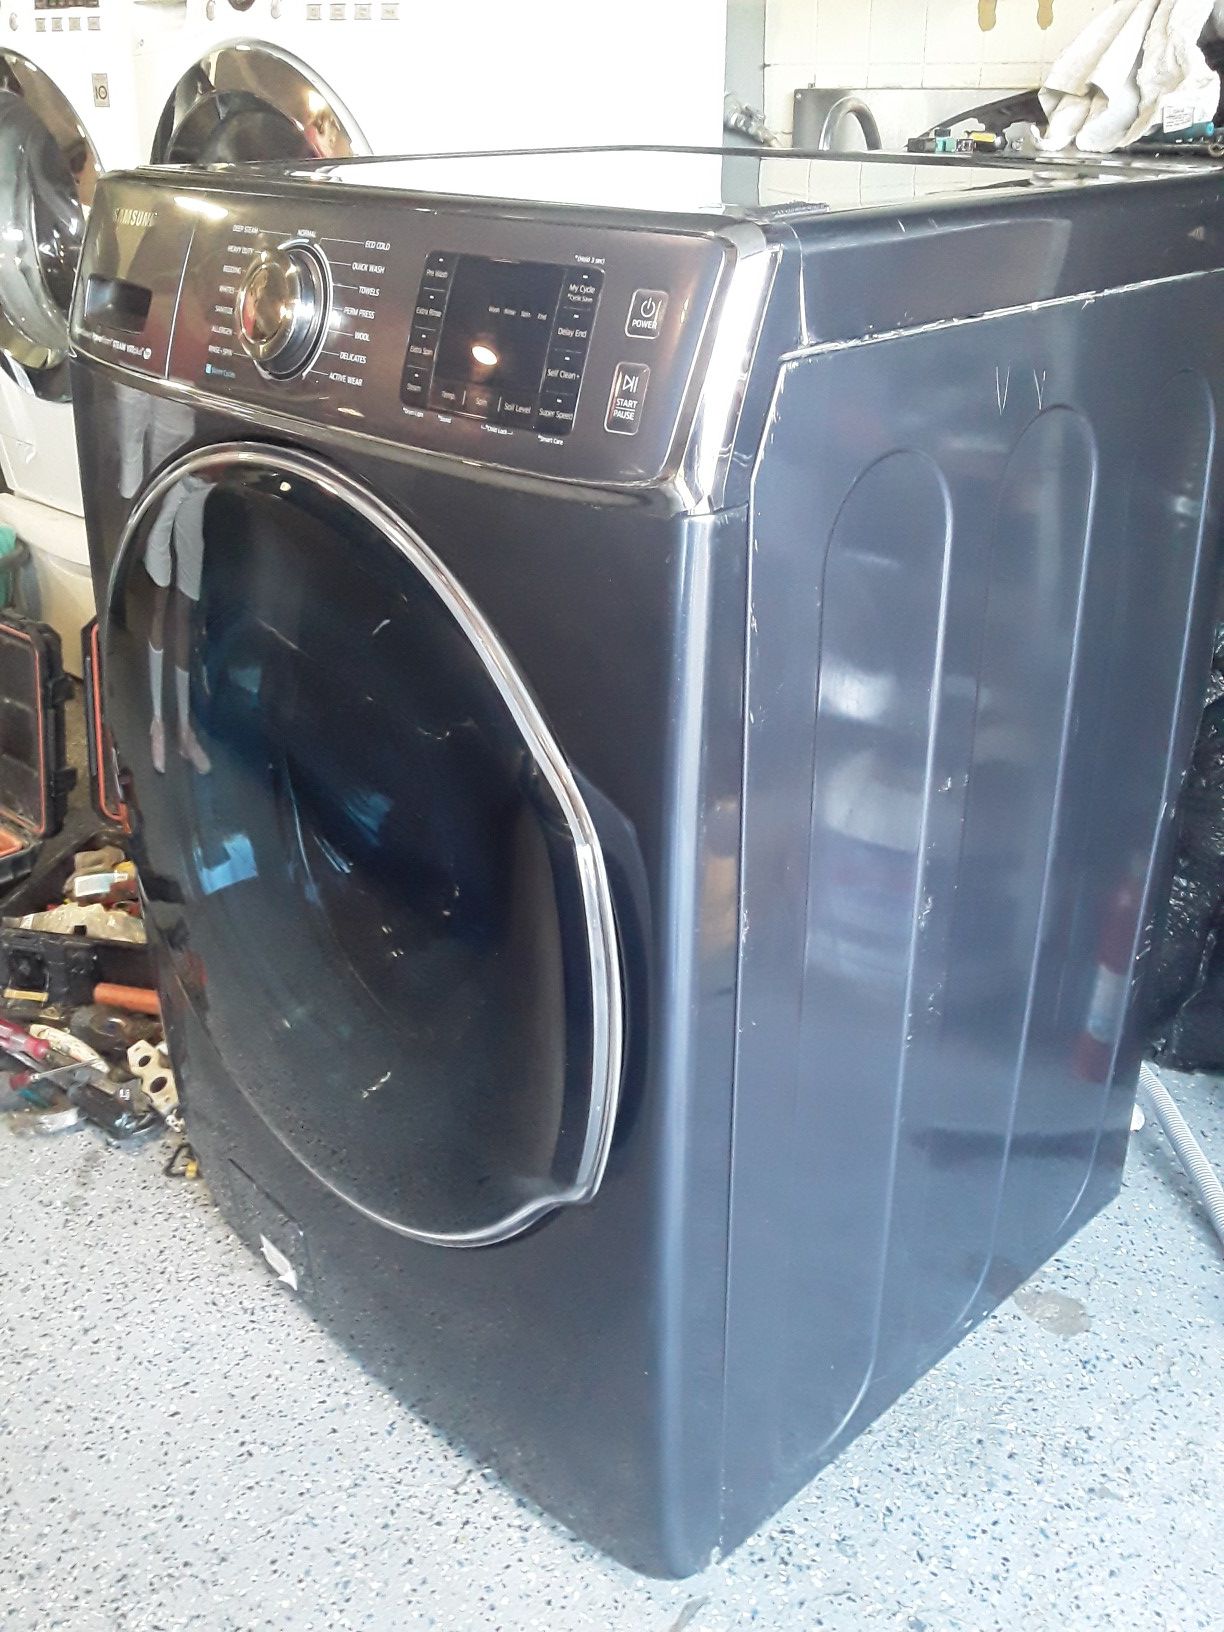 Samsung front load washer. Black. Barely used.